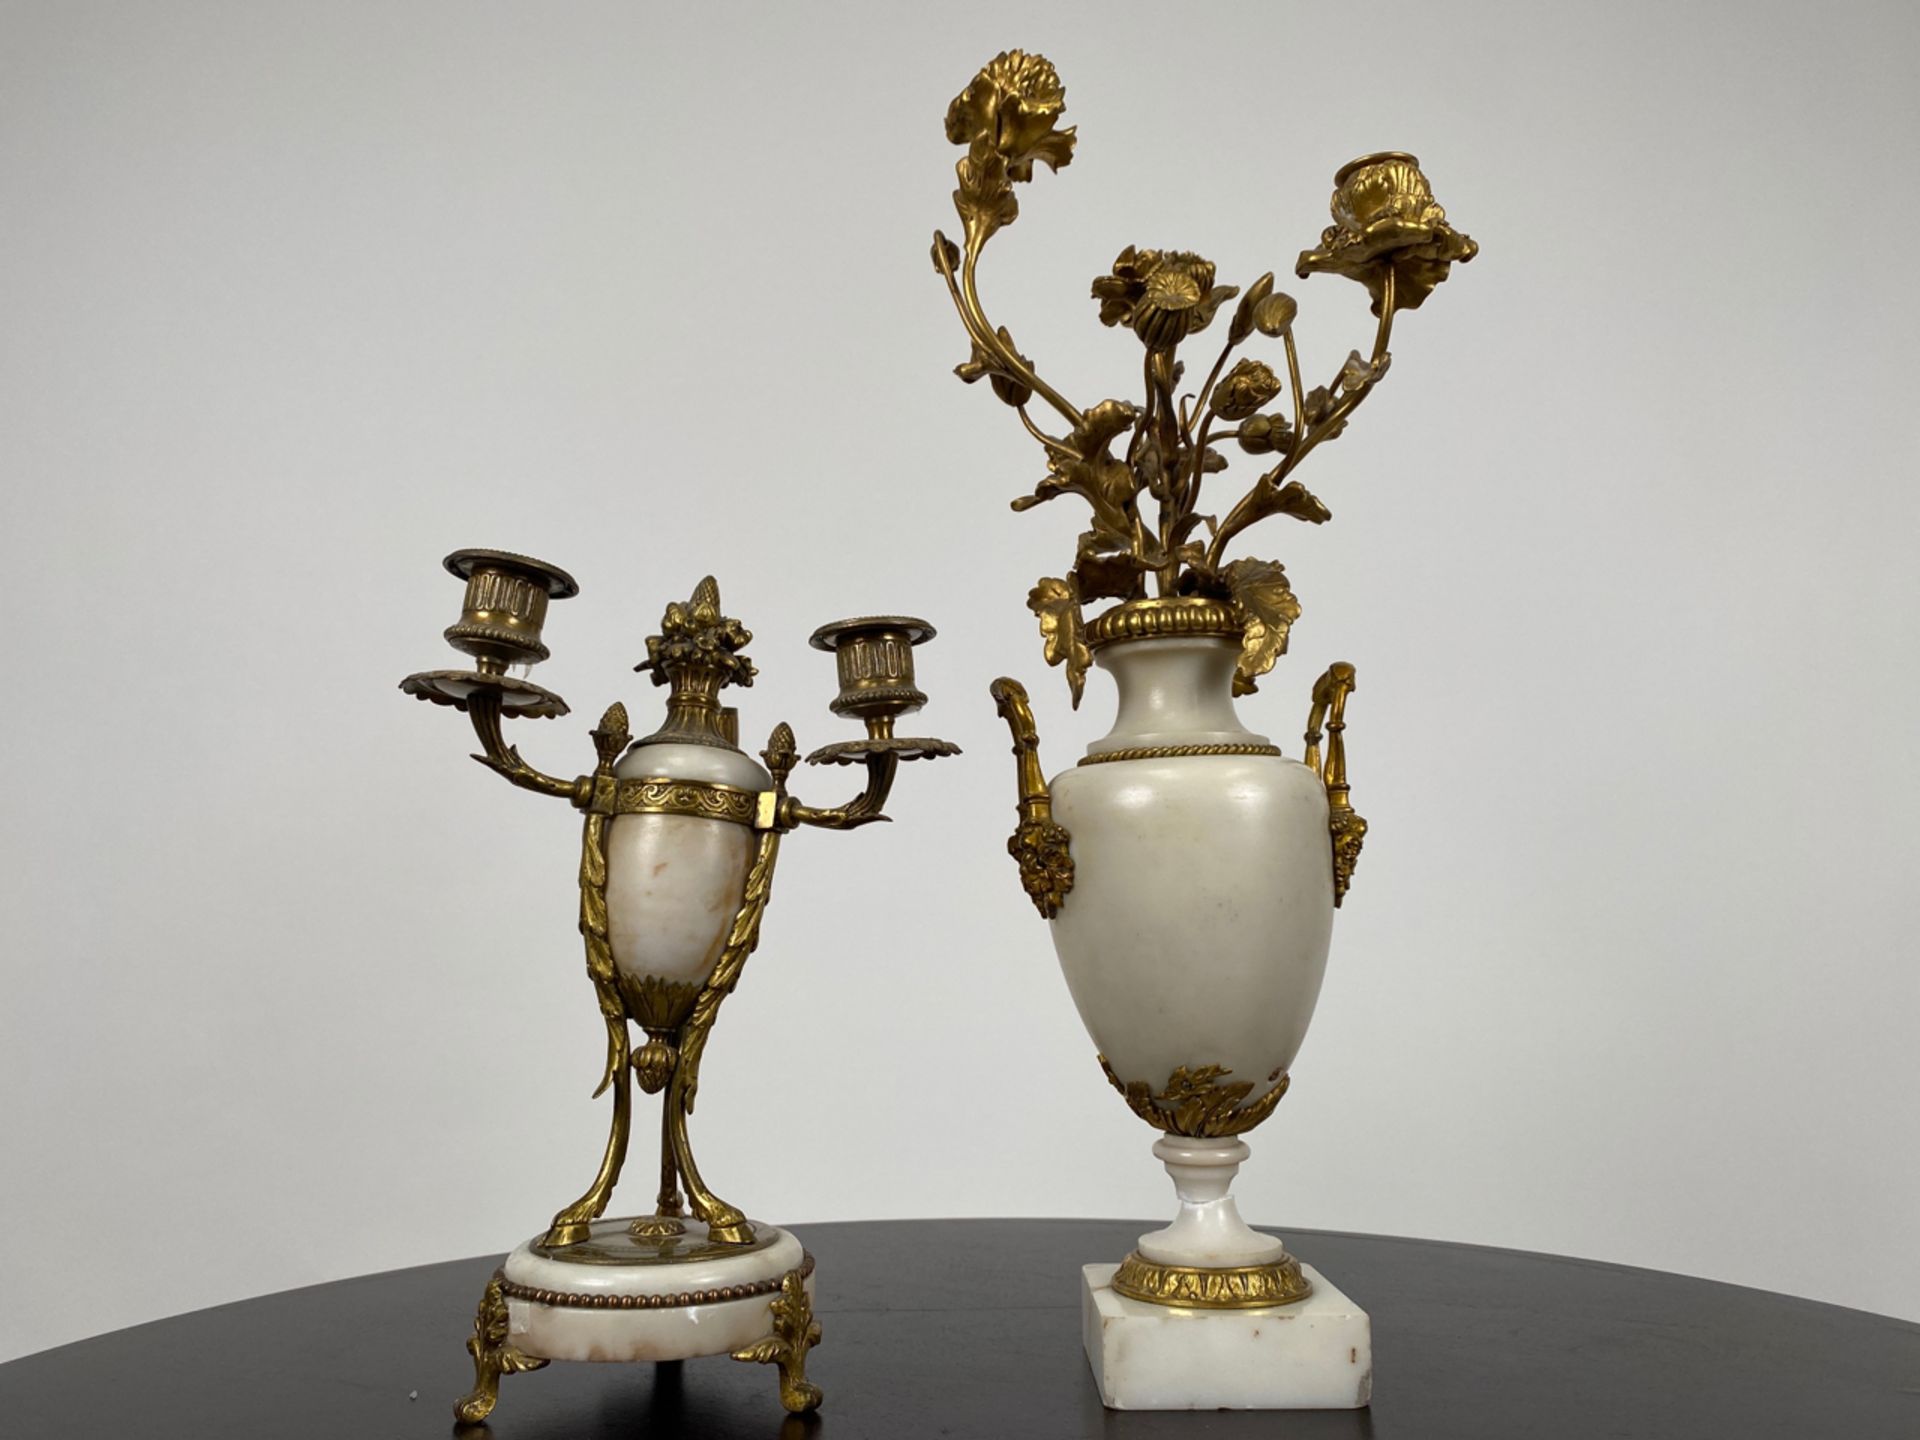 Pair of Marble and Bronze Urn Candlestick Ornaments - Image 2 of 10